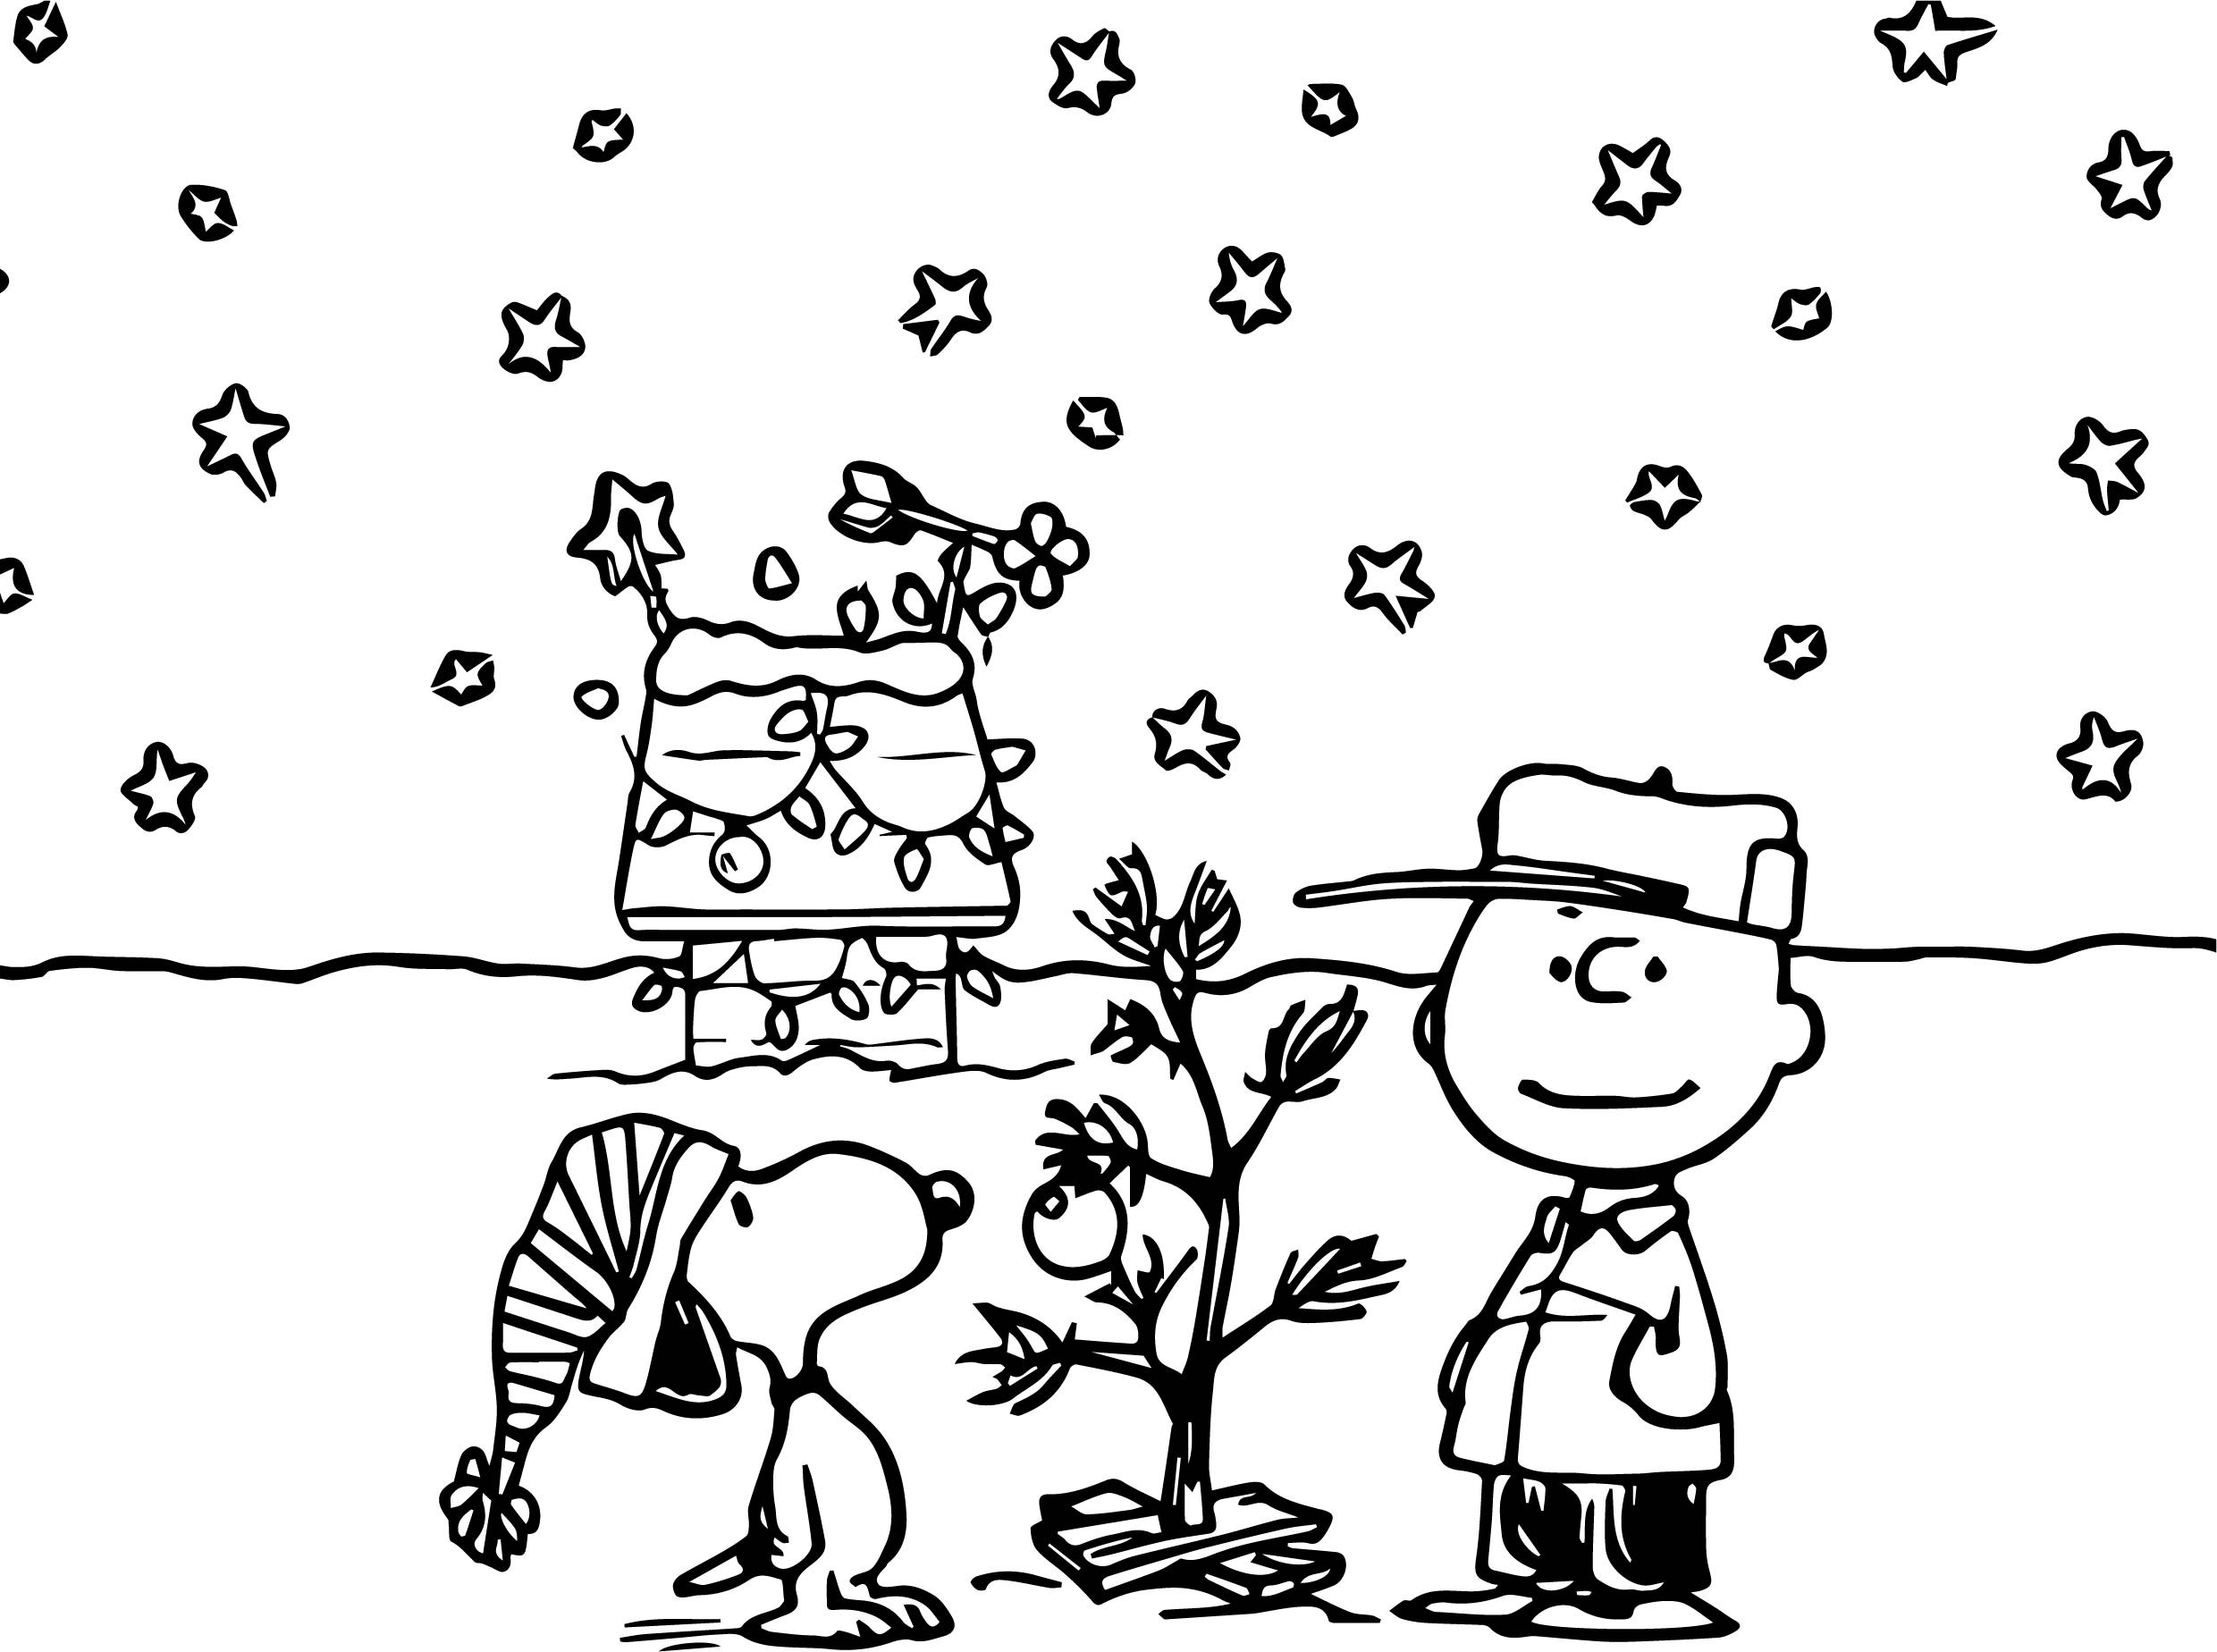 Charlie Brown Christmas Coloring Pages at GetColoringscom